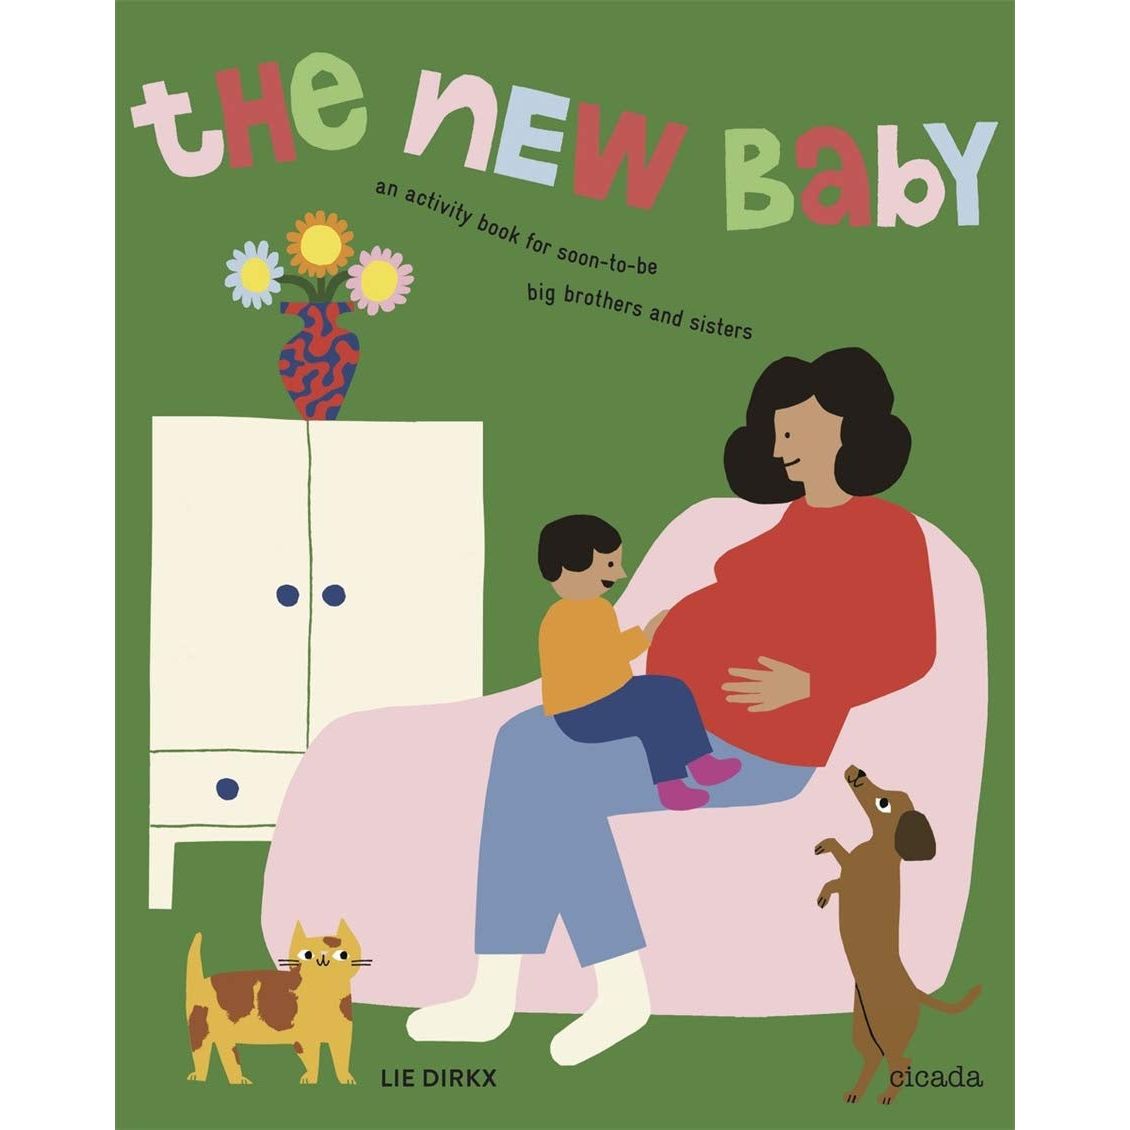 The New Baby: An activity book for soon-to-be big brothers and sisters